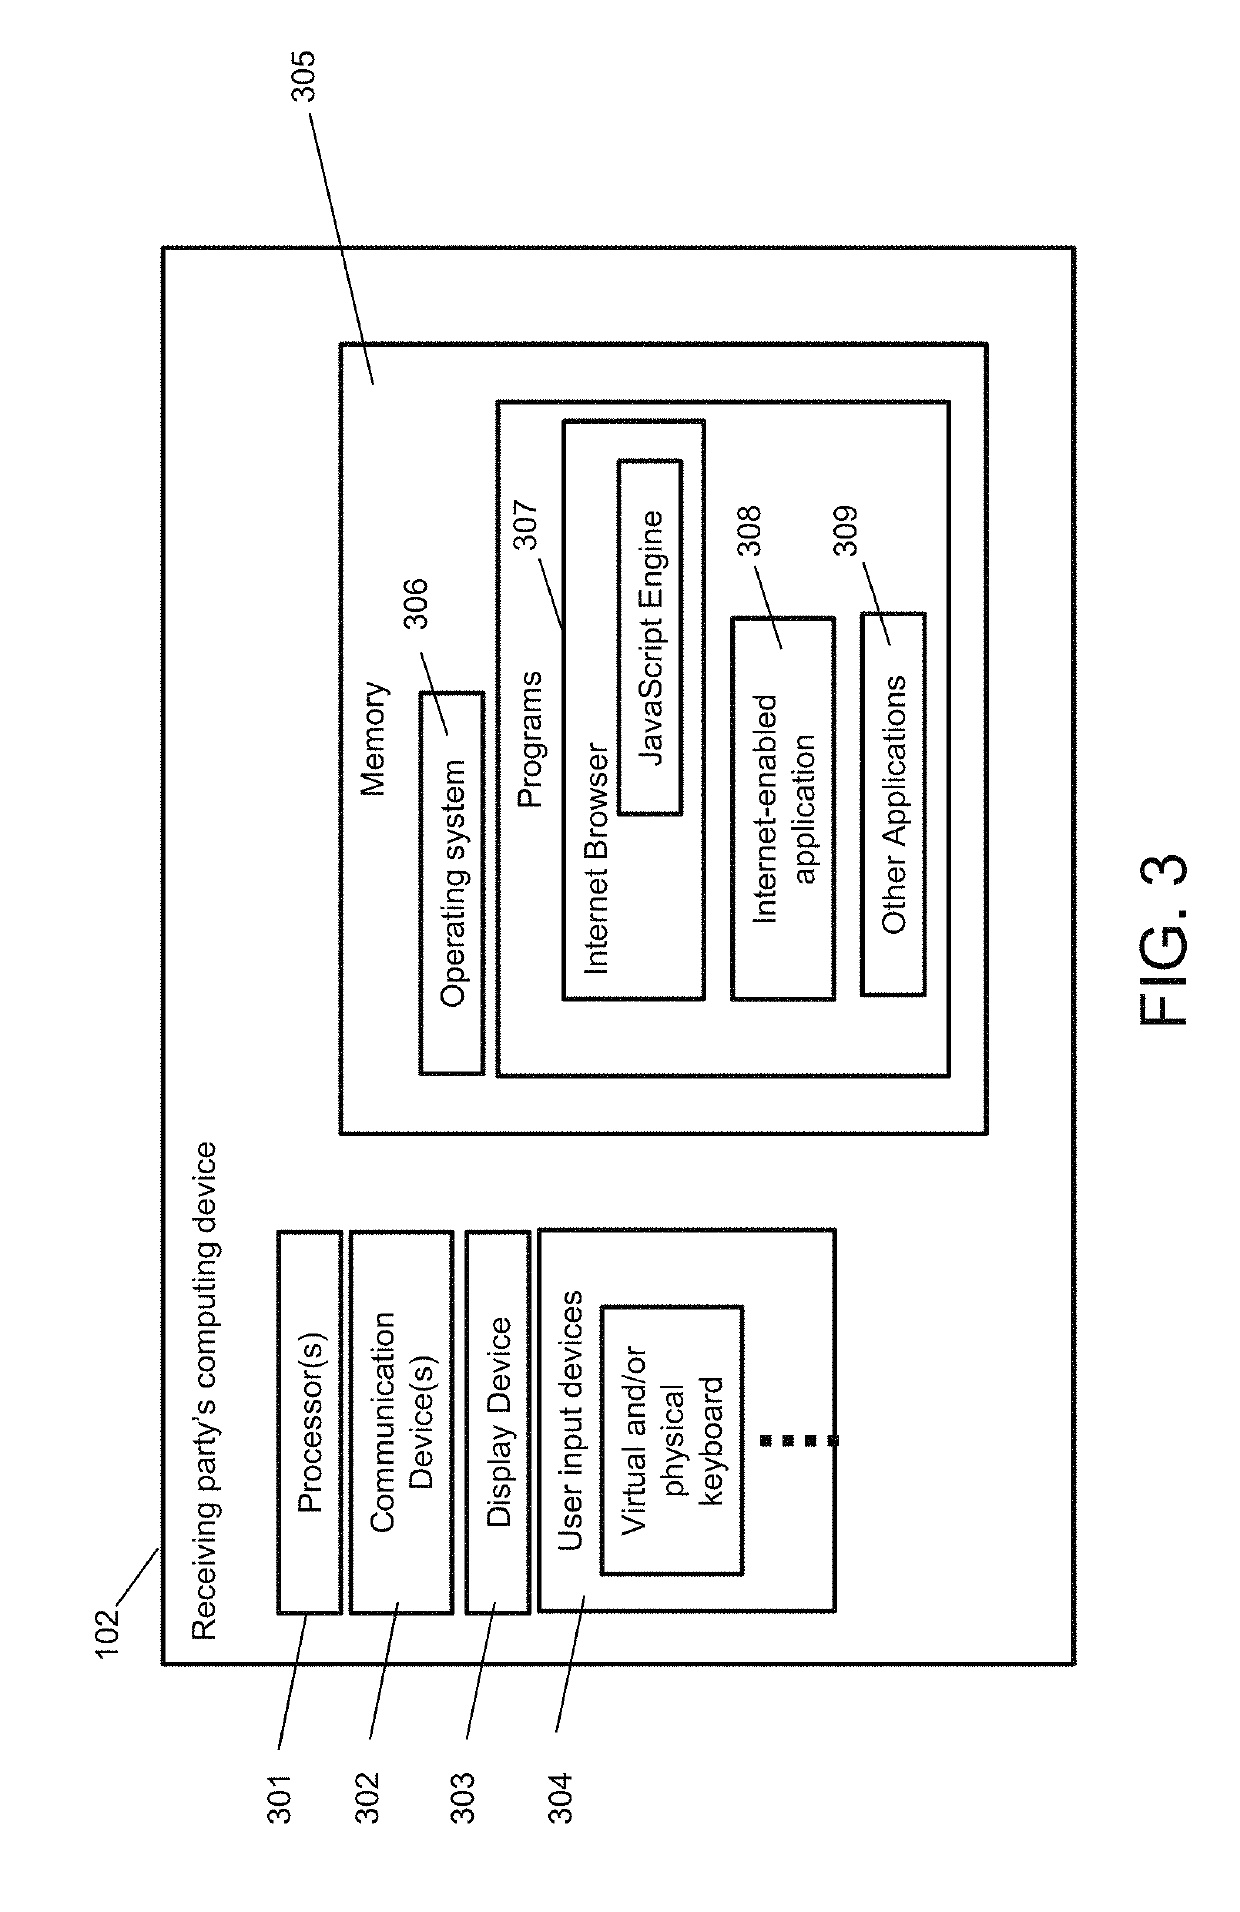 Automated Generation of Web Forms Using Fillable Electronic Documents